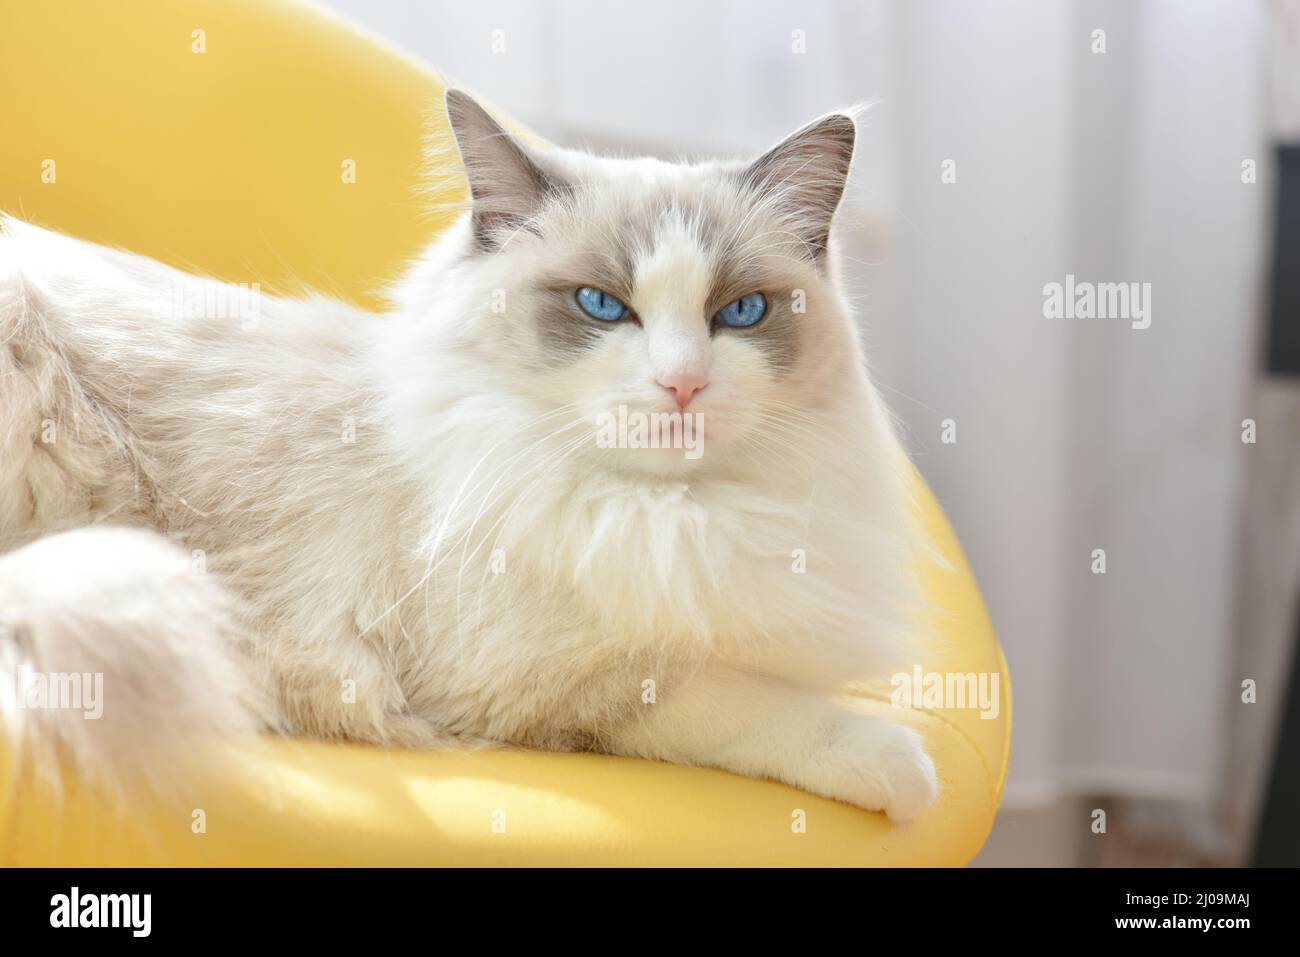 Grumpy white cat with blue eyes on a yellow chair. Purebred blue bicolor ragdoll, young female. Stock Photo